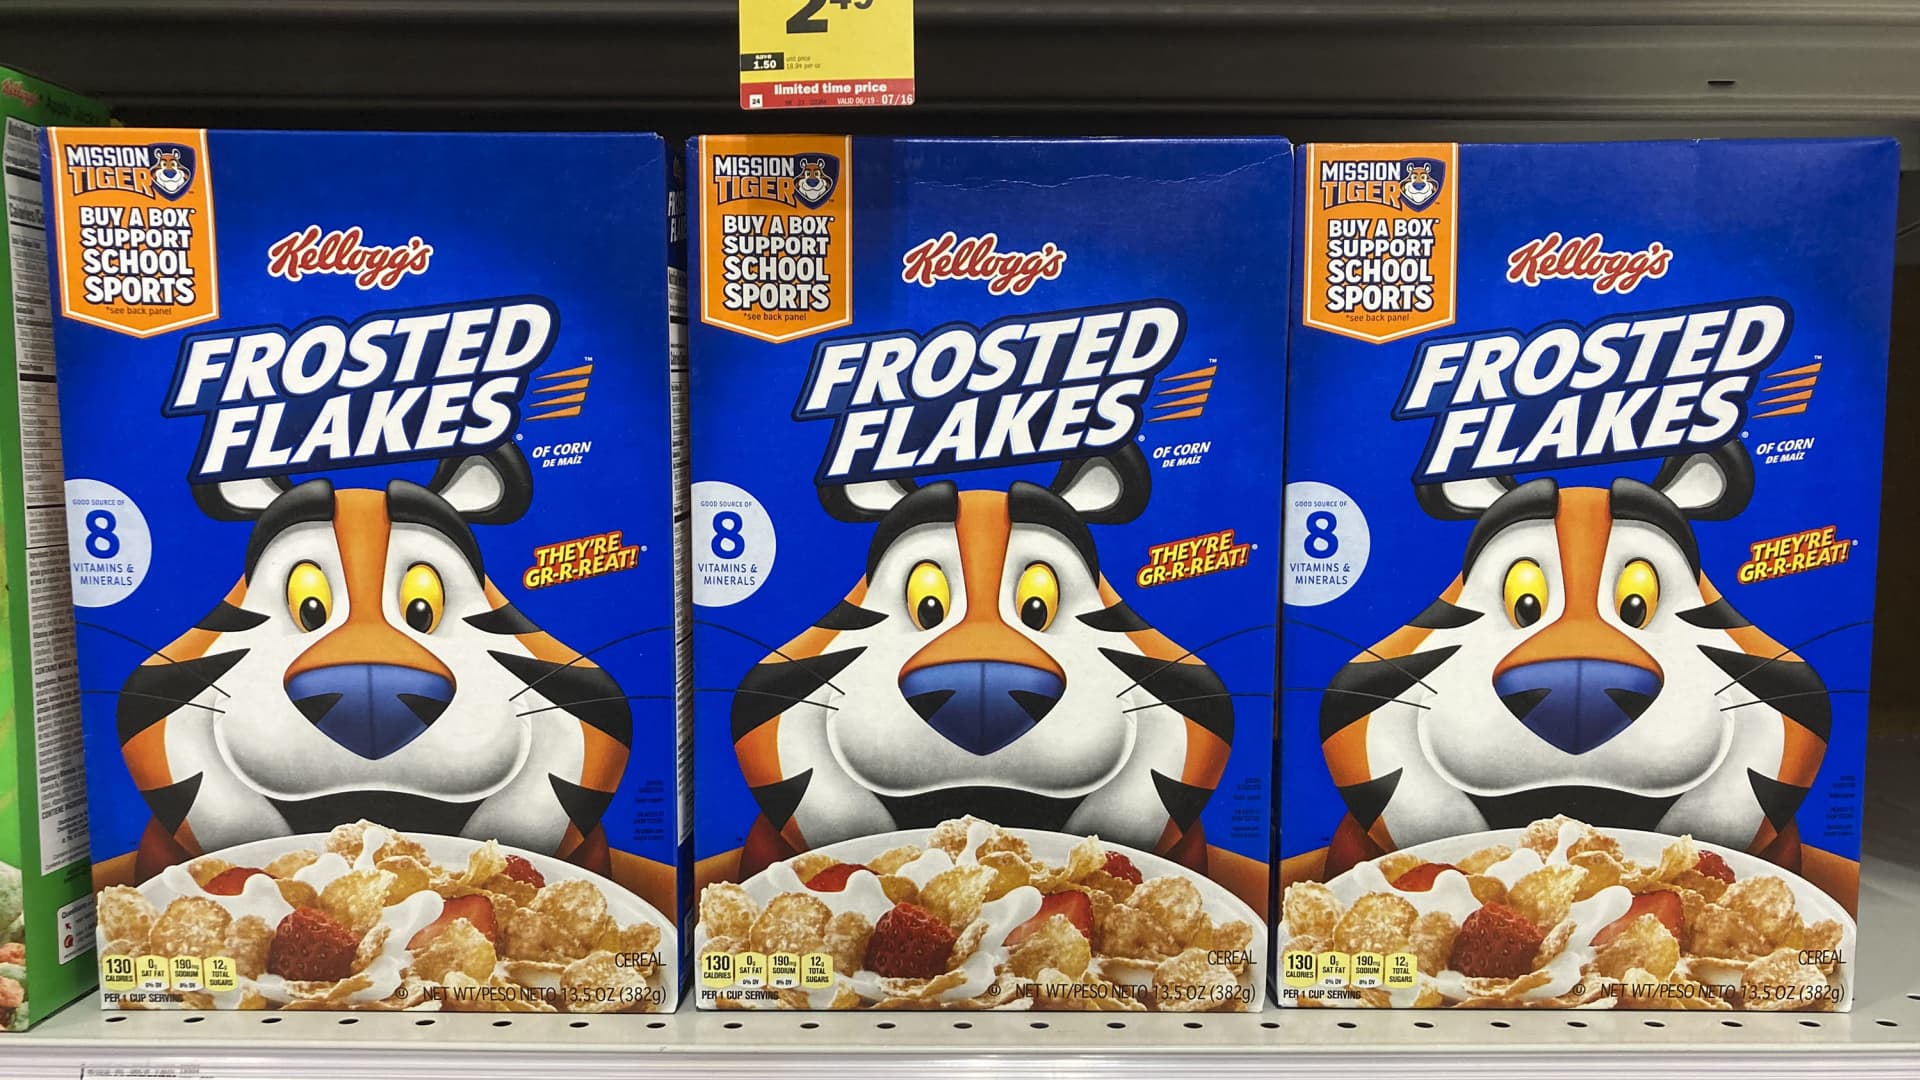 Kellogg to separate into three companies focusing on snacks, cereal and plant-based foods